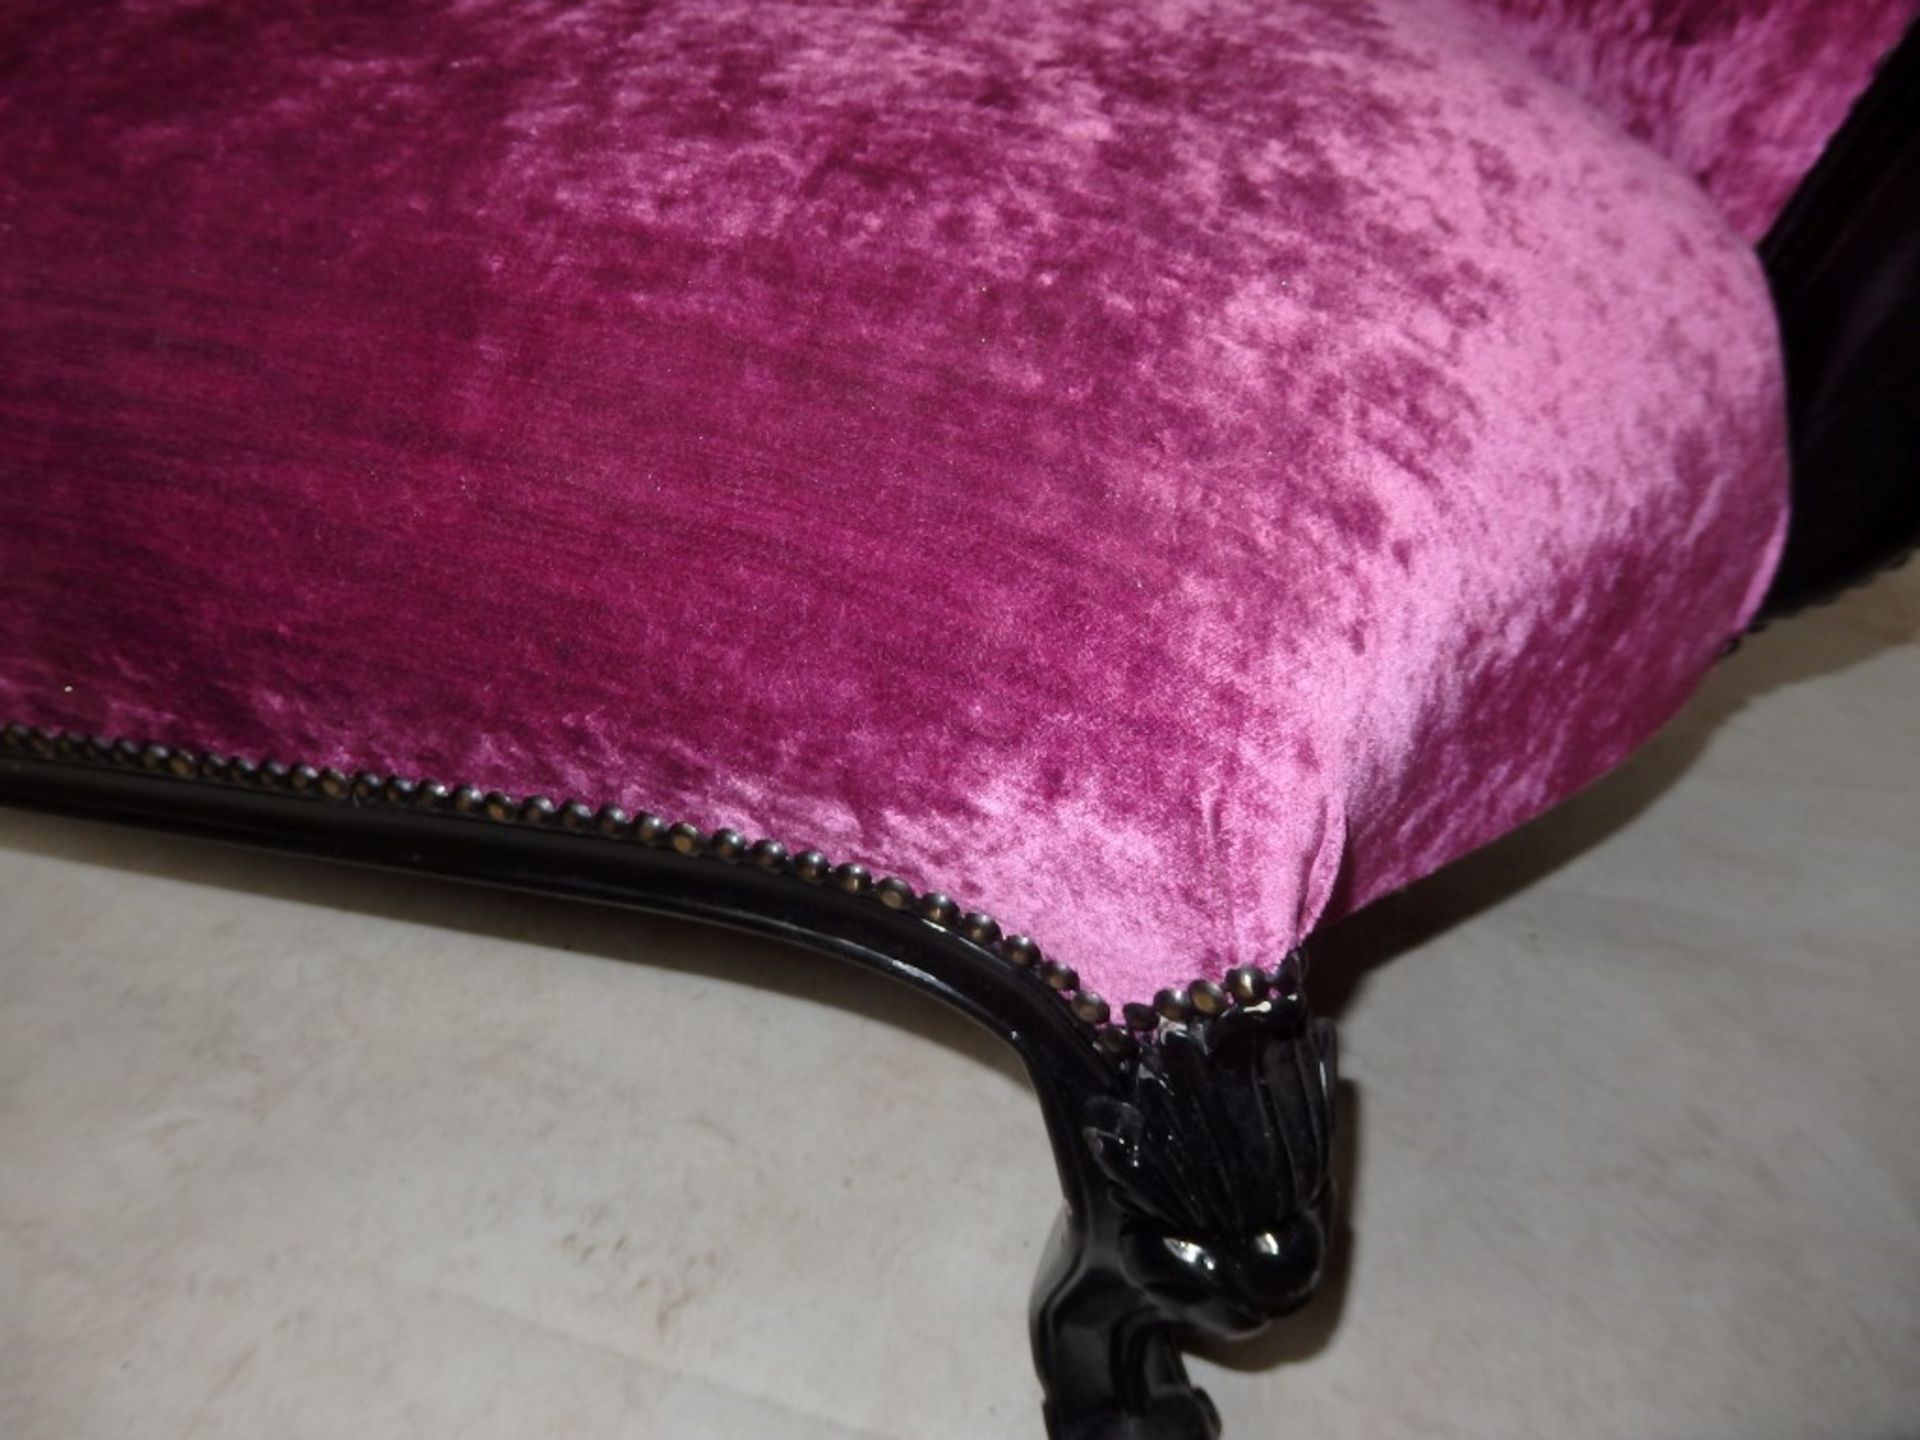 1 x Luxury French Inspired Chais - Colour Black Painted Frame With Magenta Chenille Upholstery - - Image 4 of 12